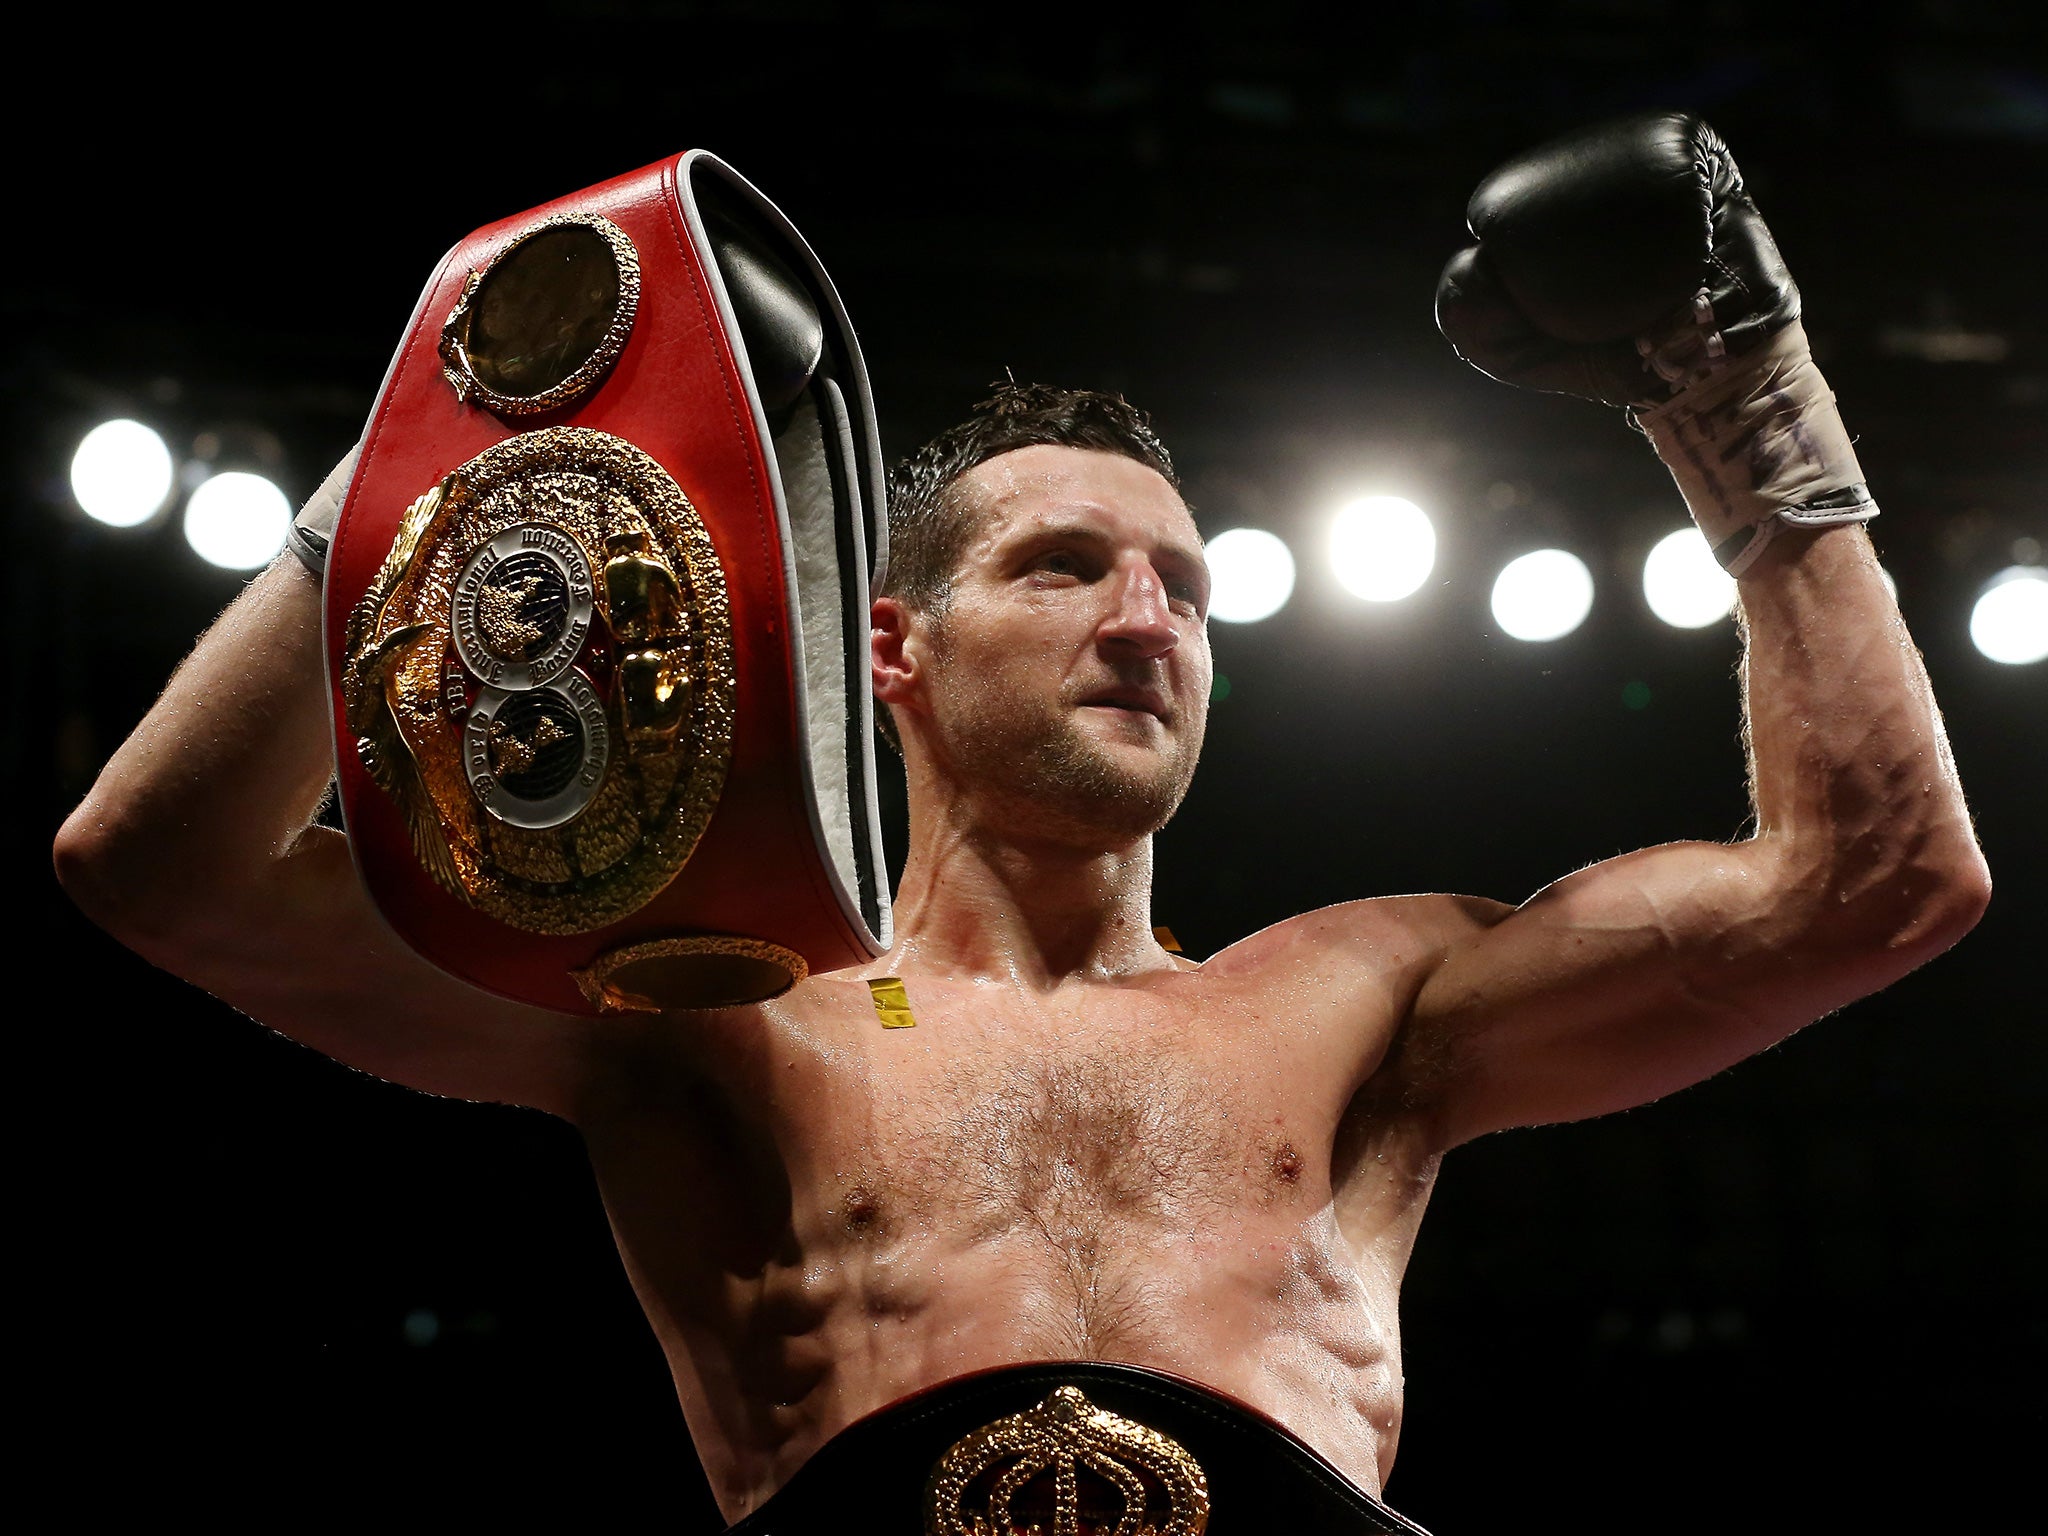 Froch has not fought since his victorious rematch against Groves in 2014